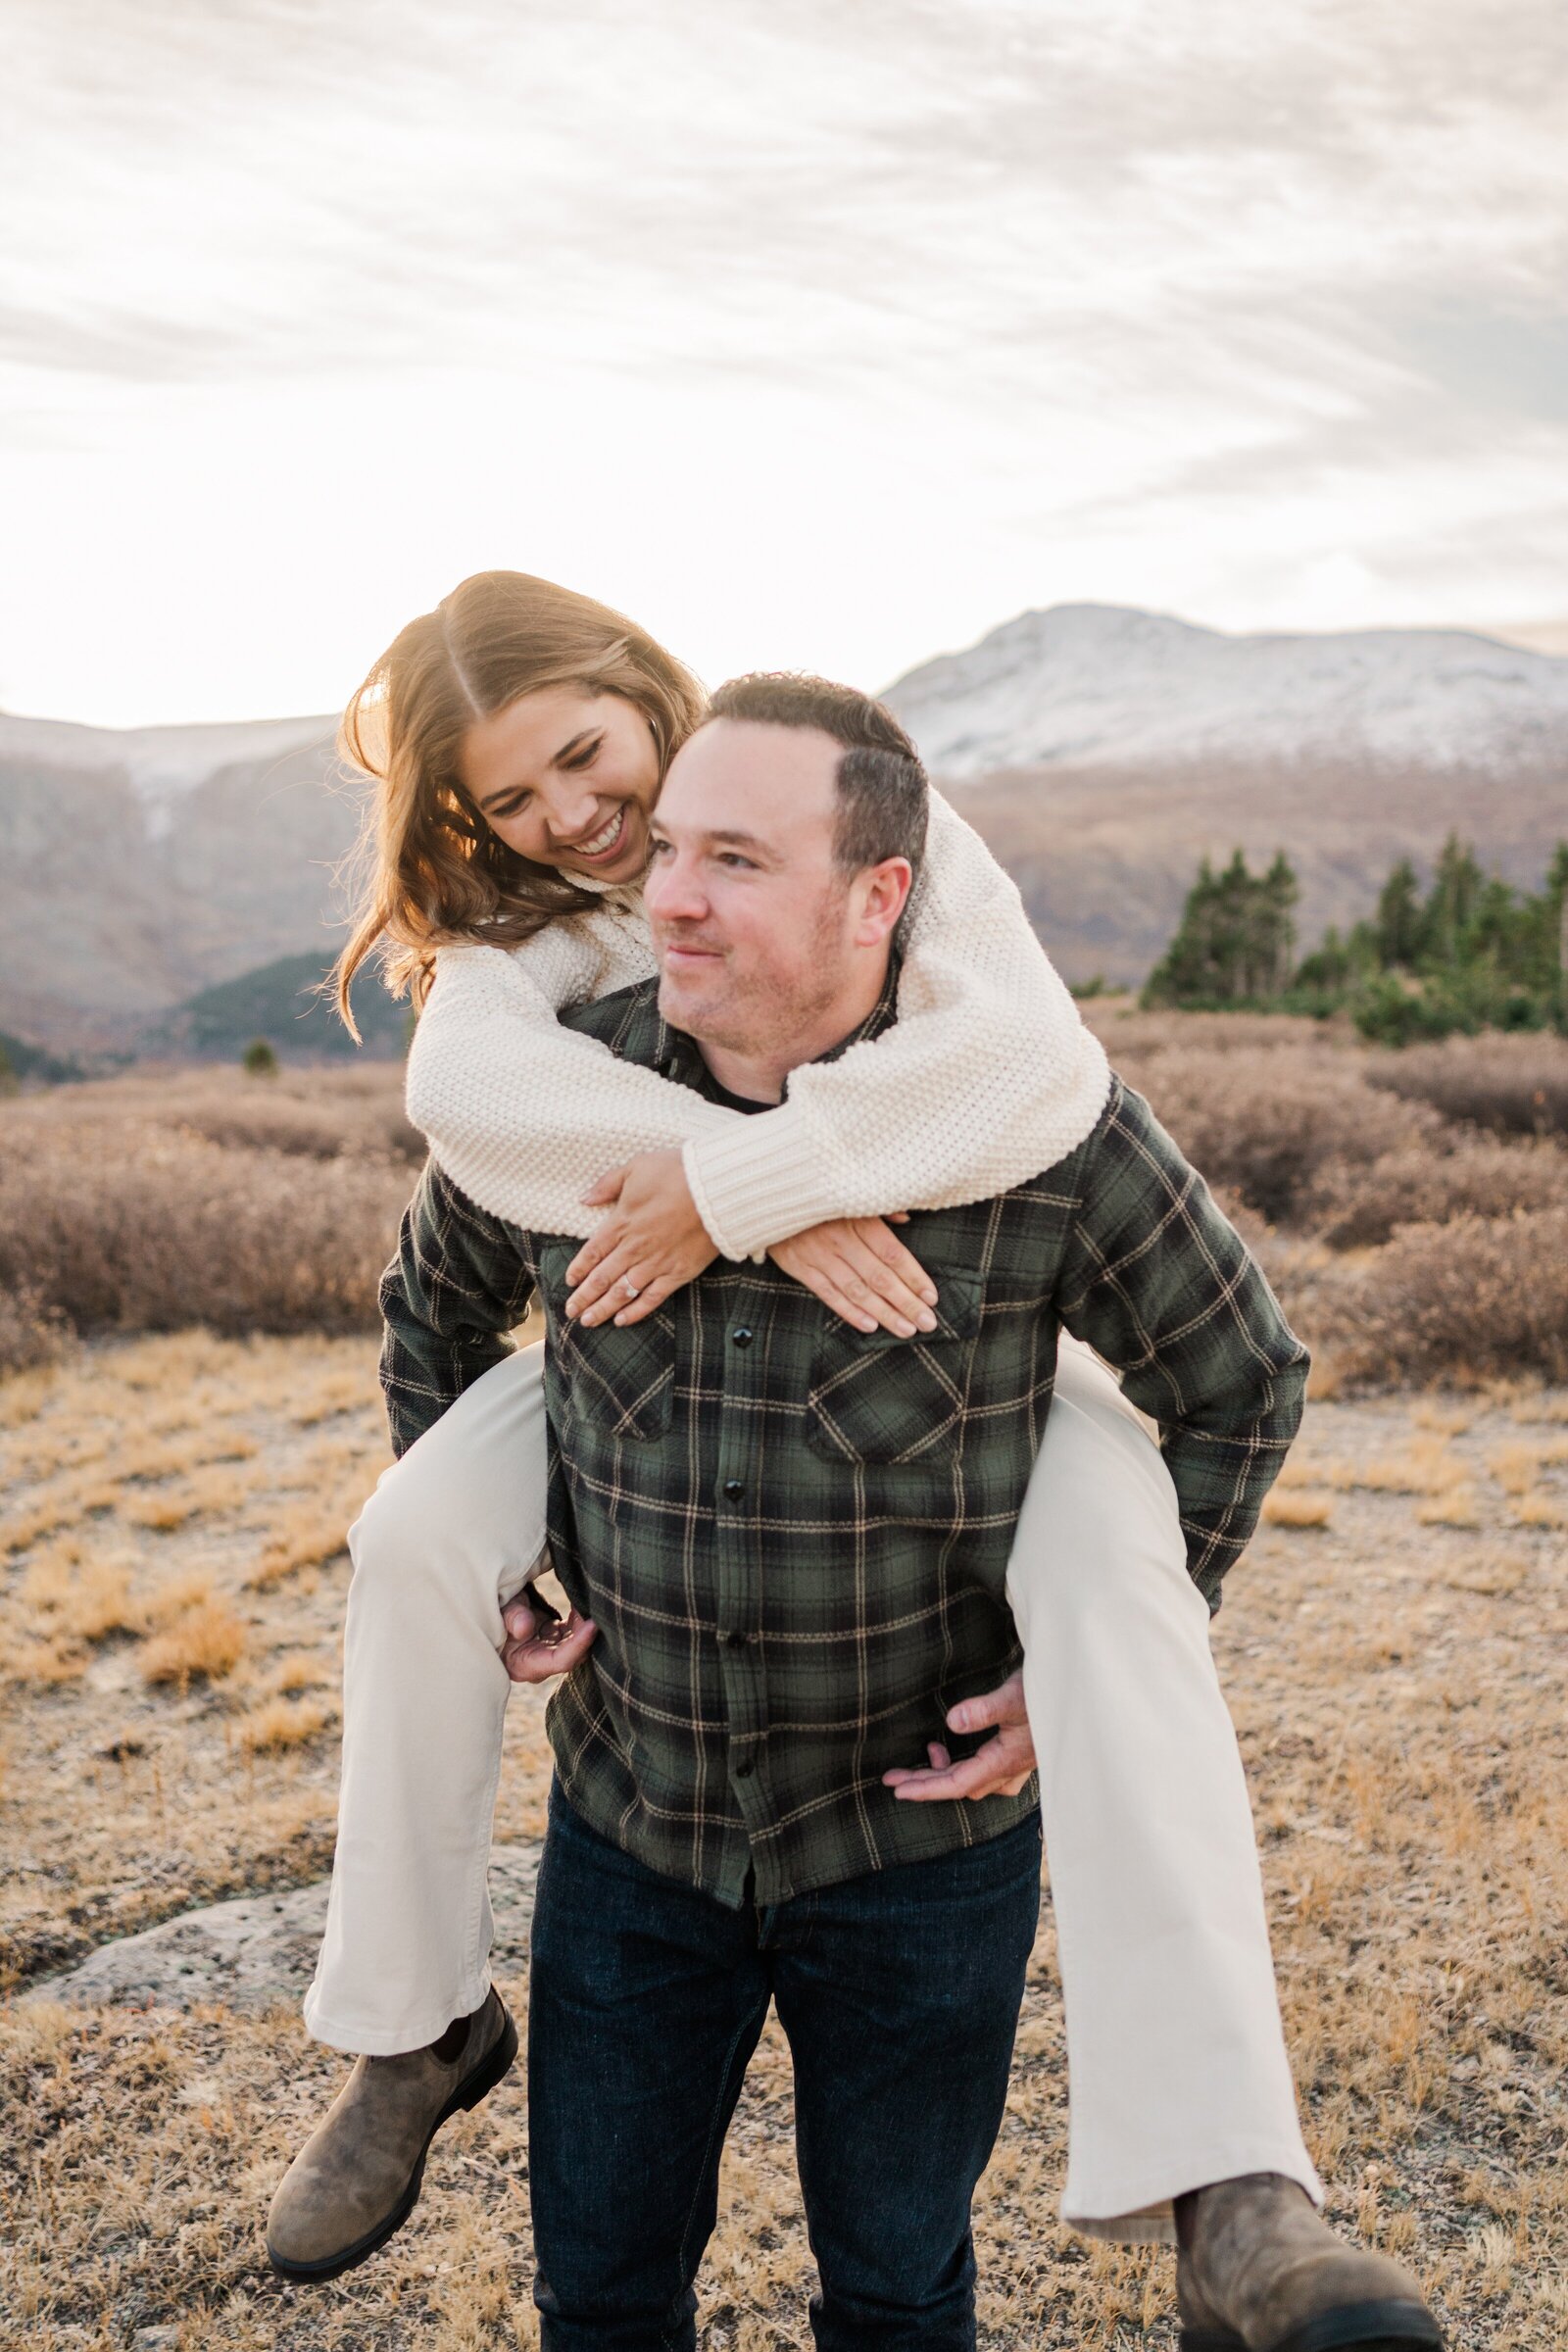 Experience matters when it comes to capturing your special day. Trust Samantha Immer Photography, your experienced Colorado wedding photographer, to provide professional photography services that exceed your expectations and create memories that last a lifetime.